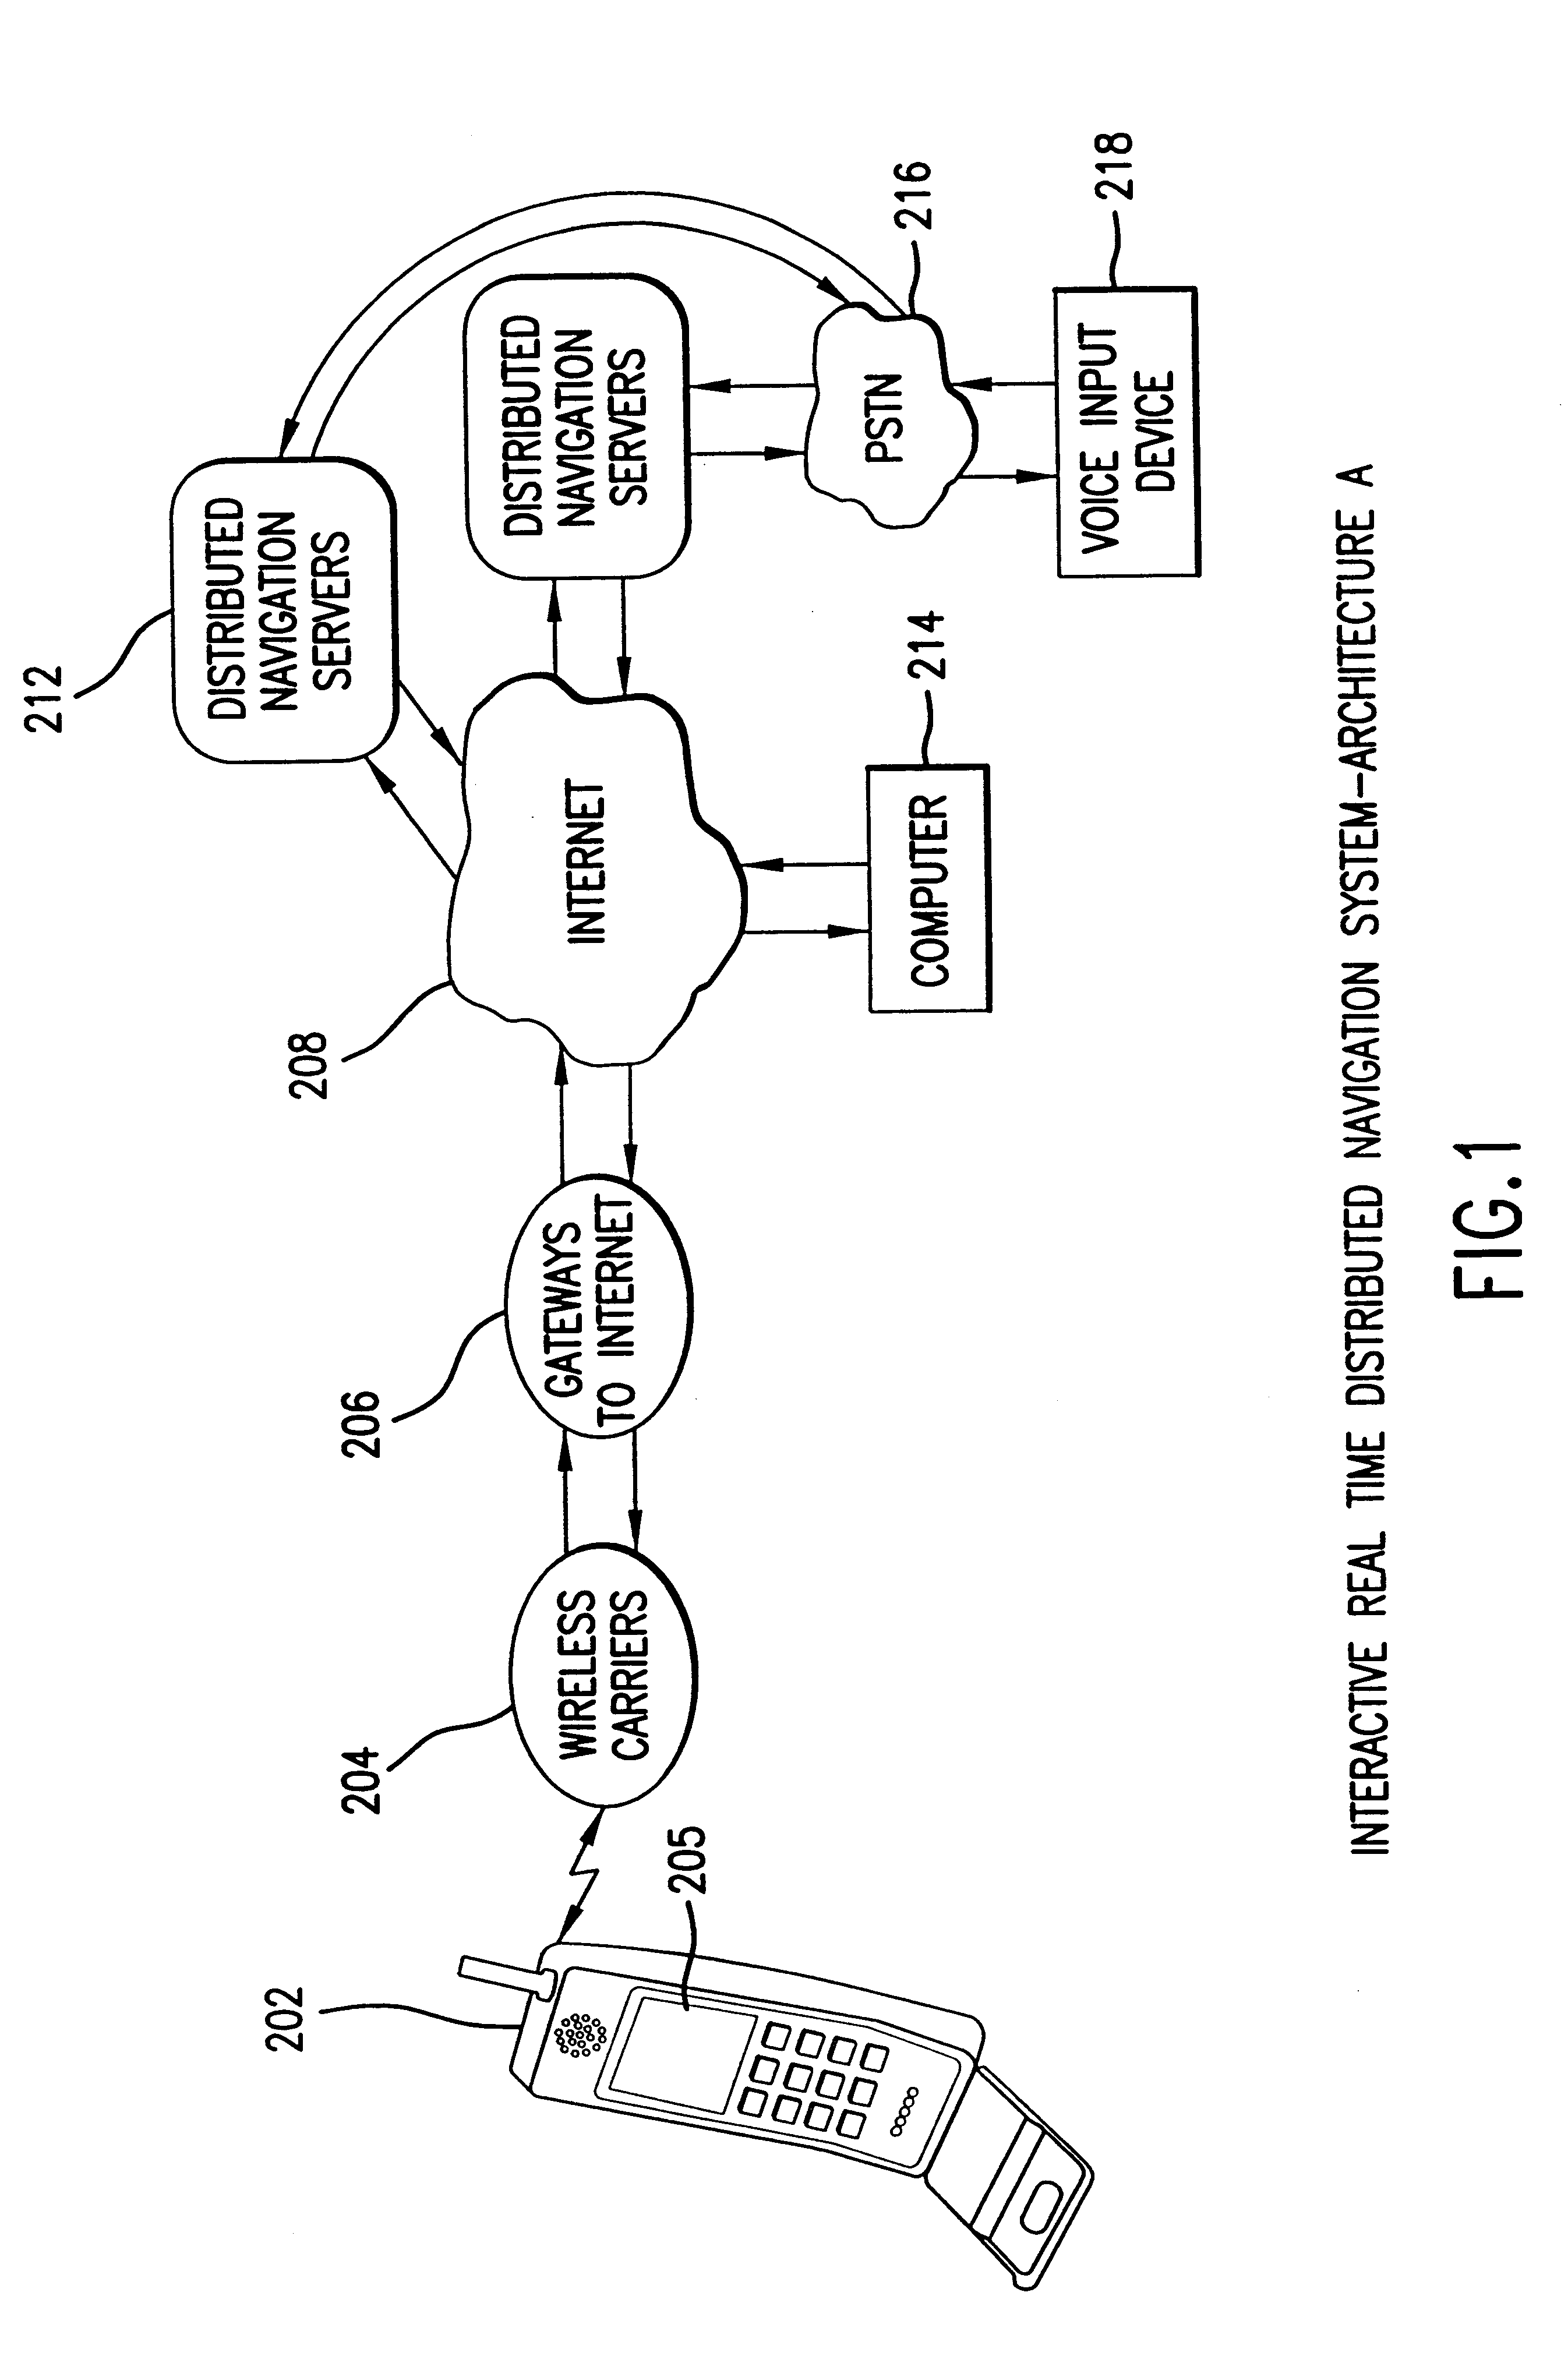 Method and system for an efficient operating environment in a real-time navigation system